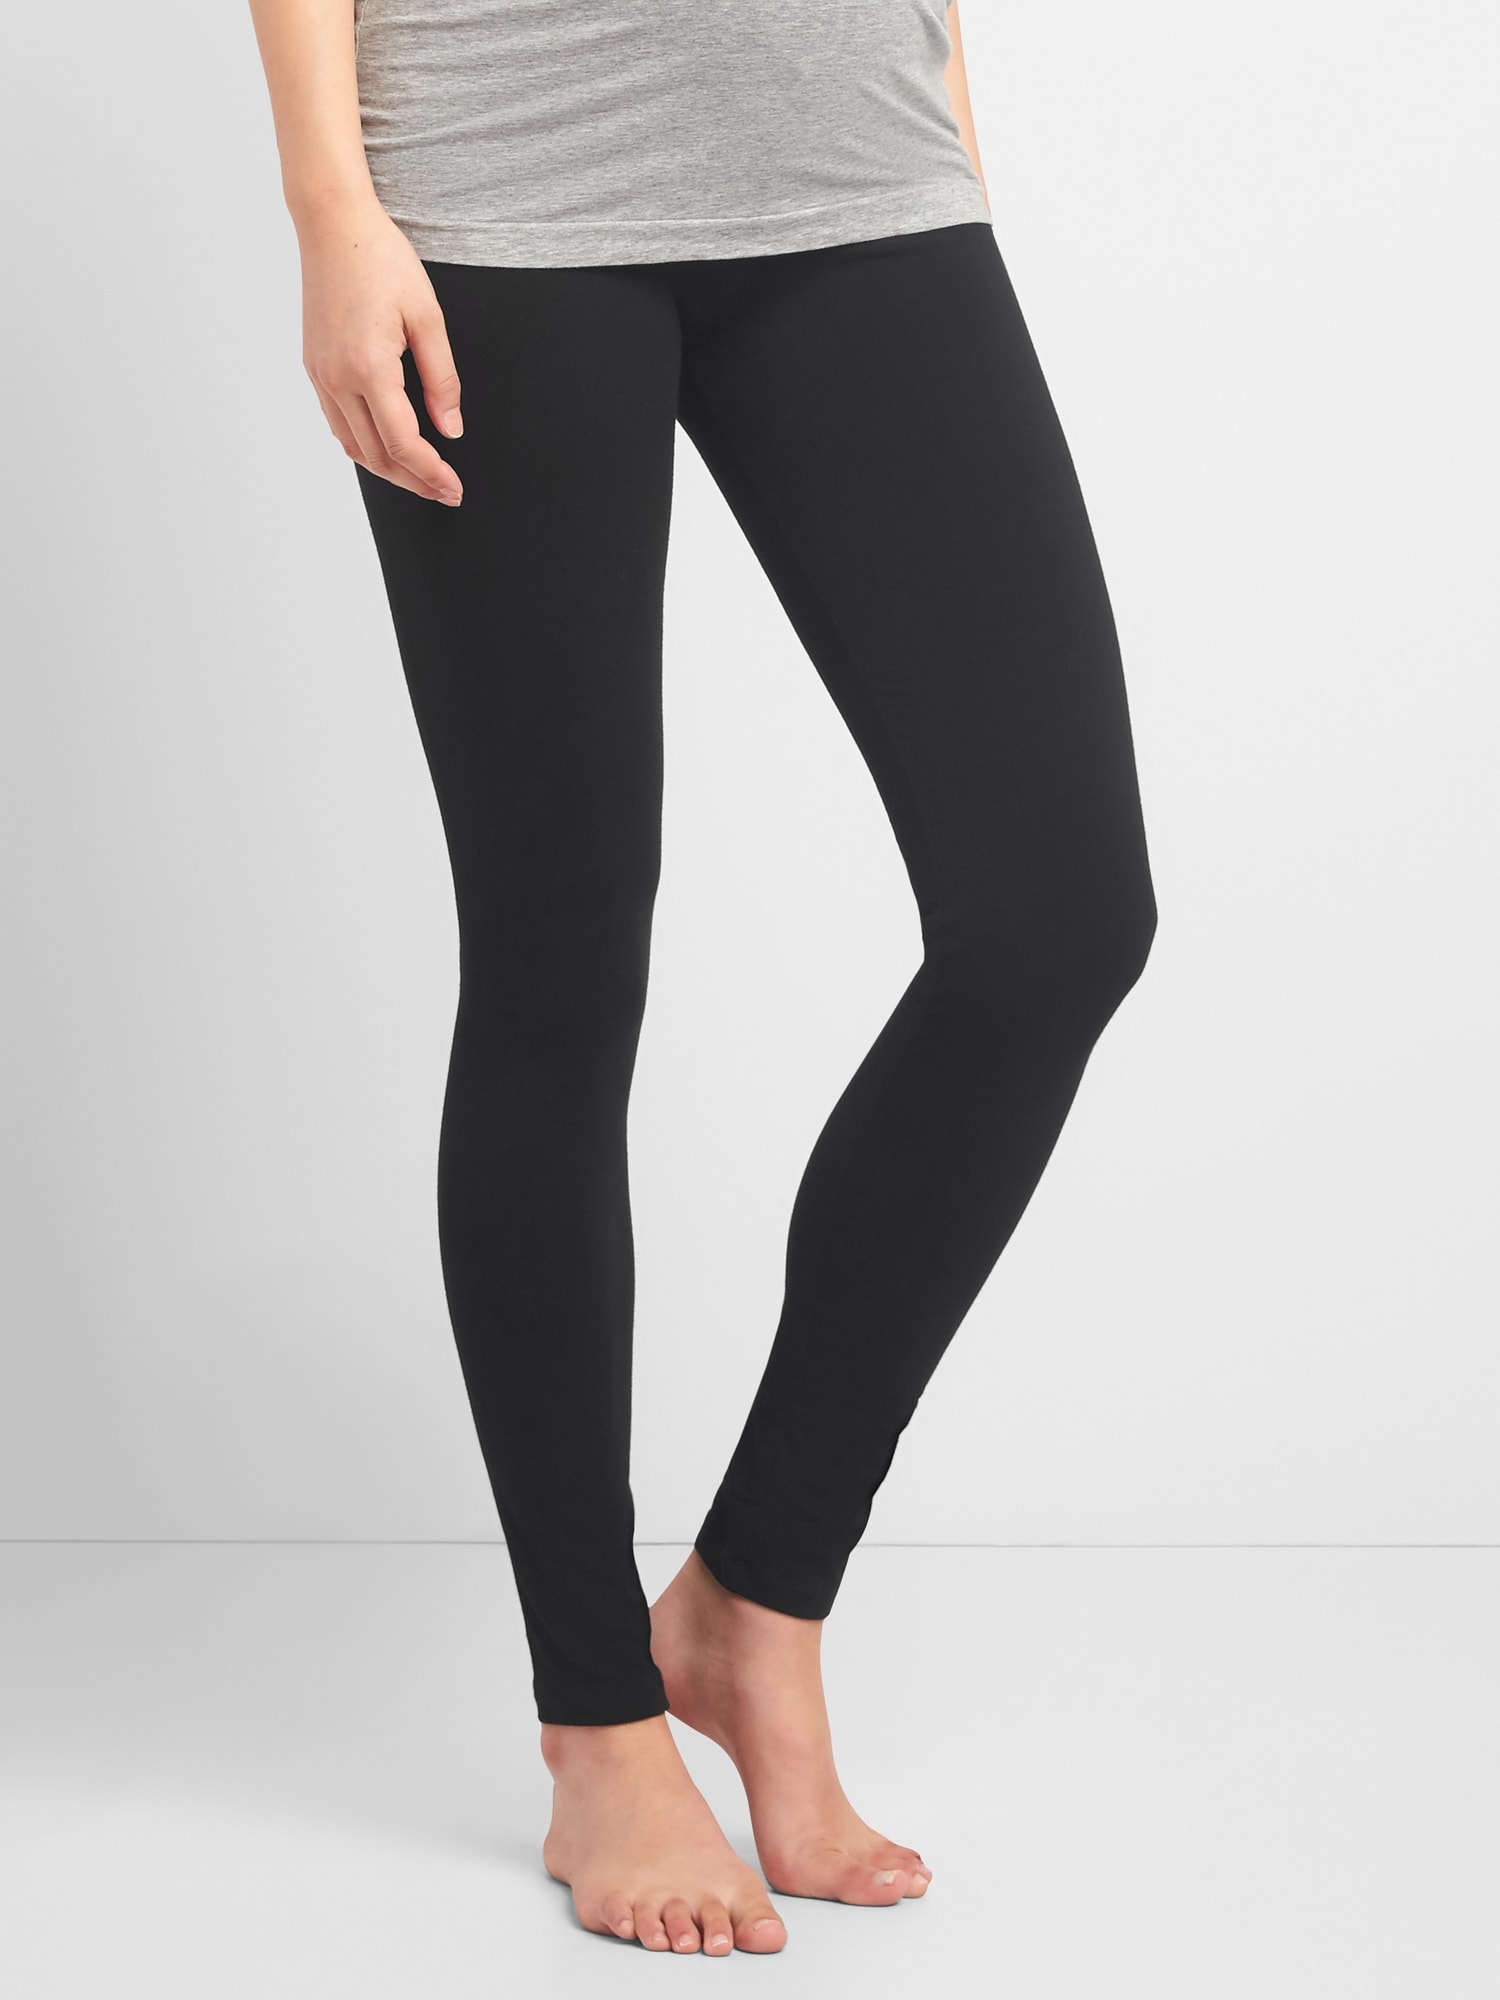 Gap Body Modal Leggings For Sale  International Society of Precision  Agriculture